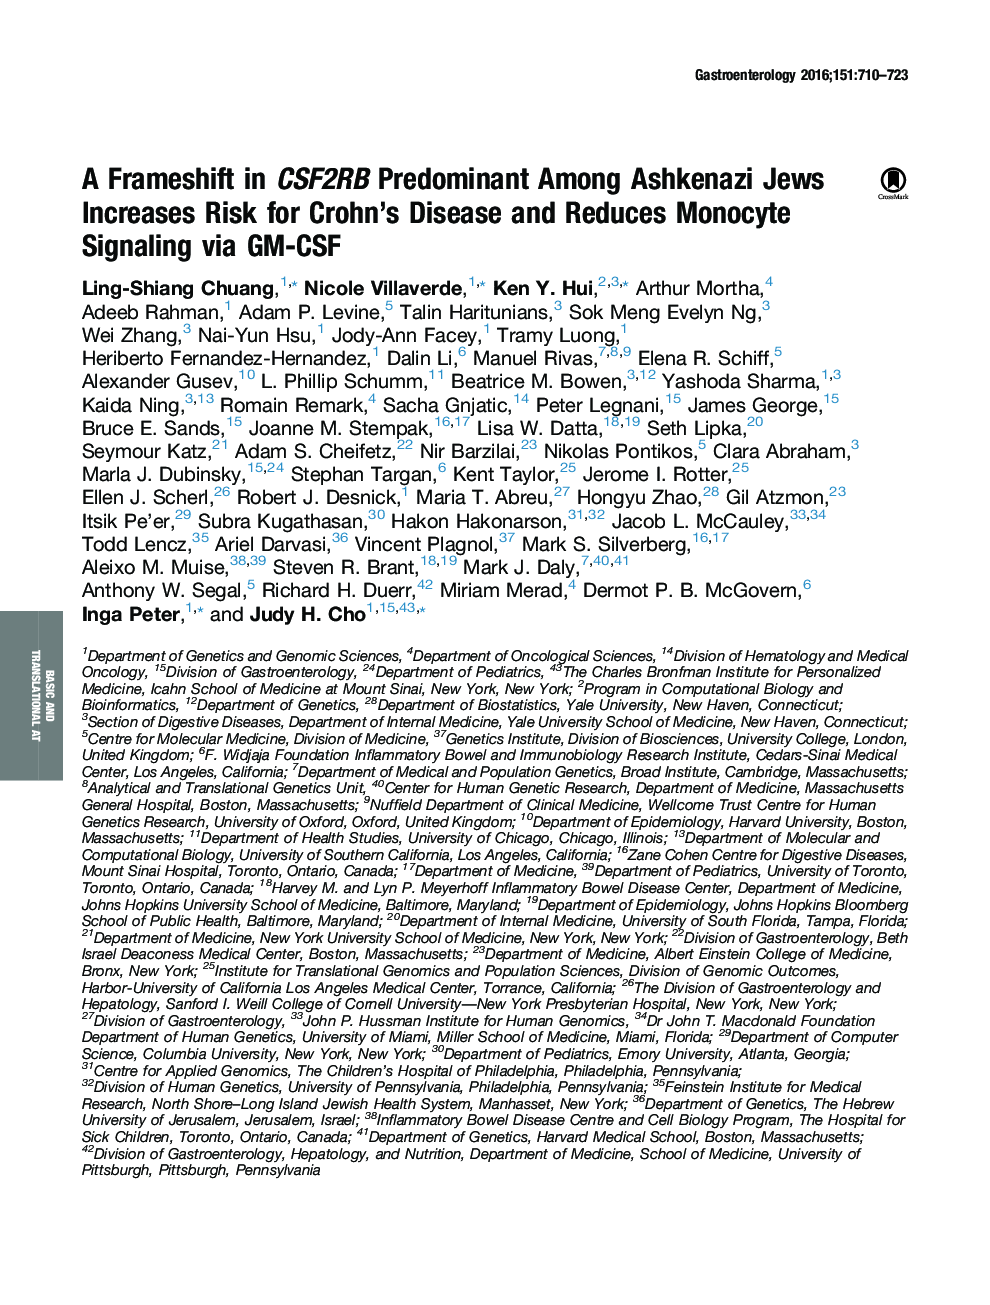 A Frameshift in CSF2RB Predominant Among Ashkenazi Jews Increases Risk for Crohn's Disease and Reduces Monocyte Signaling via GM-CSF